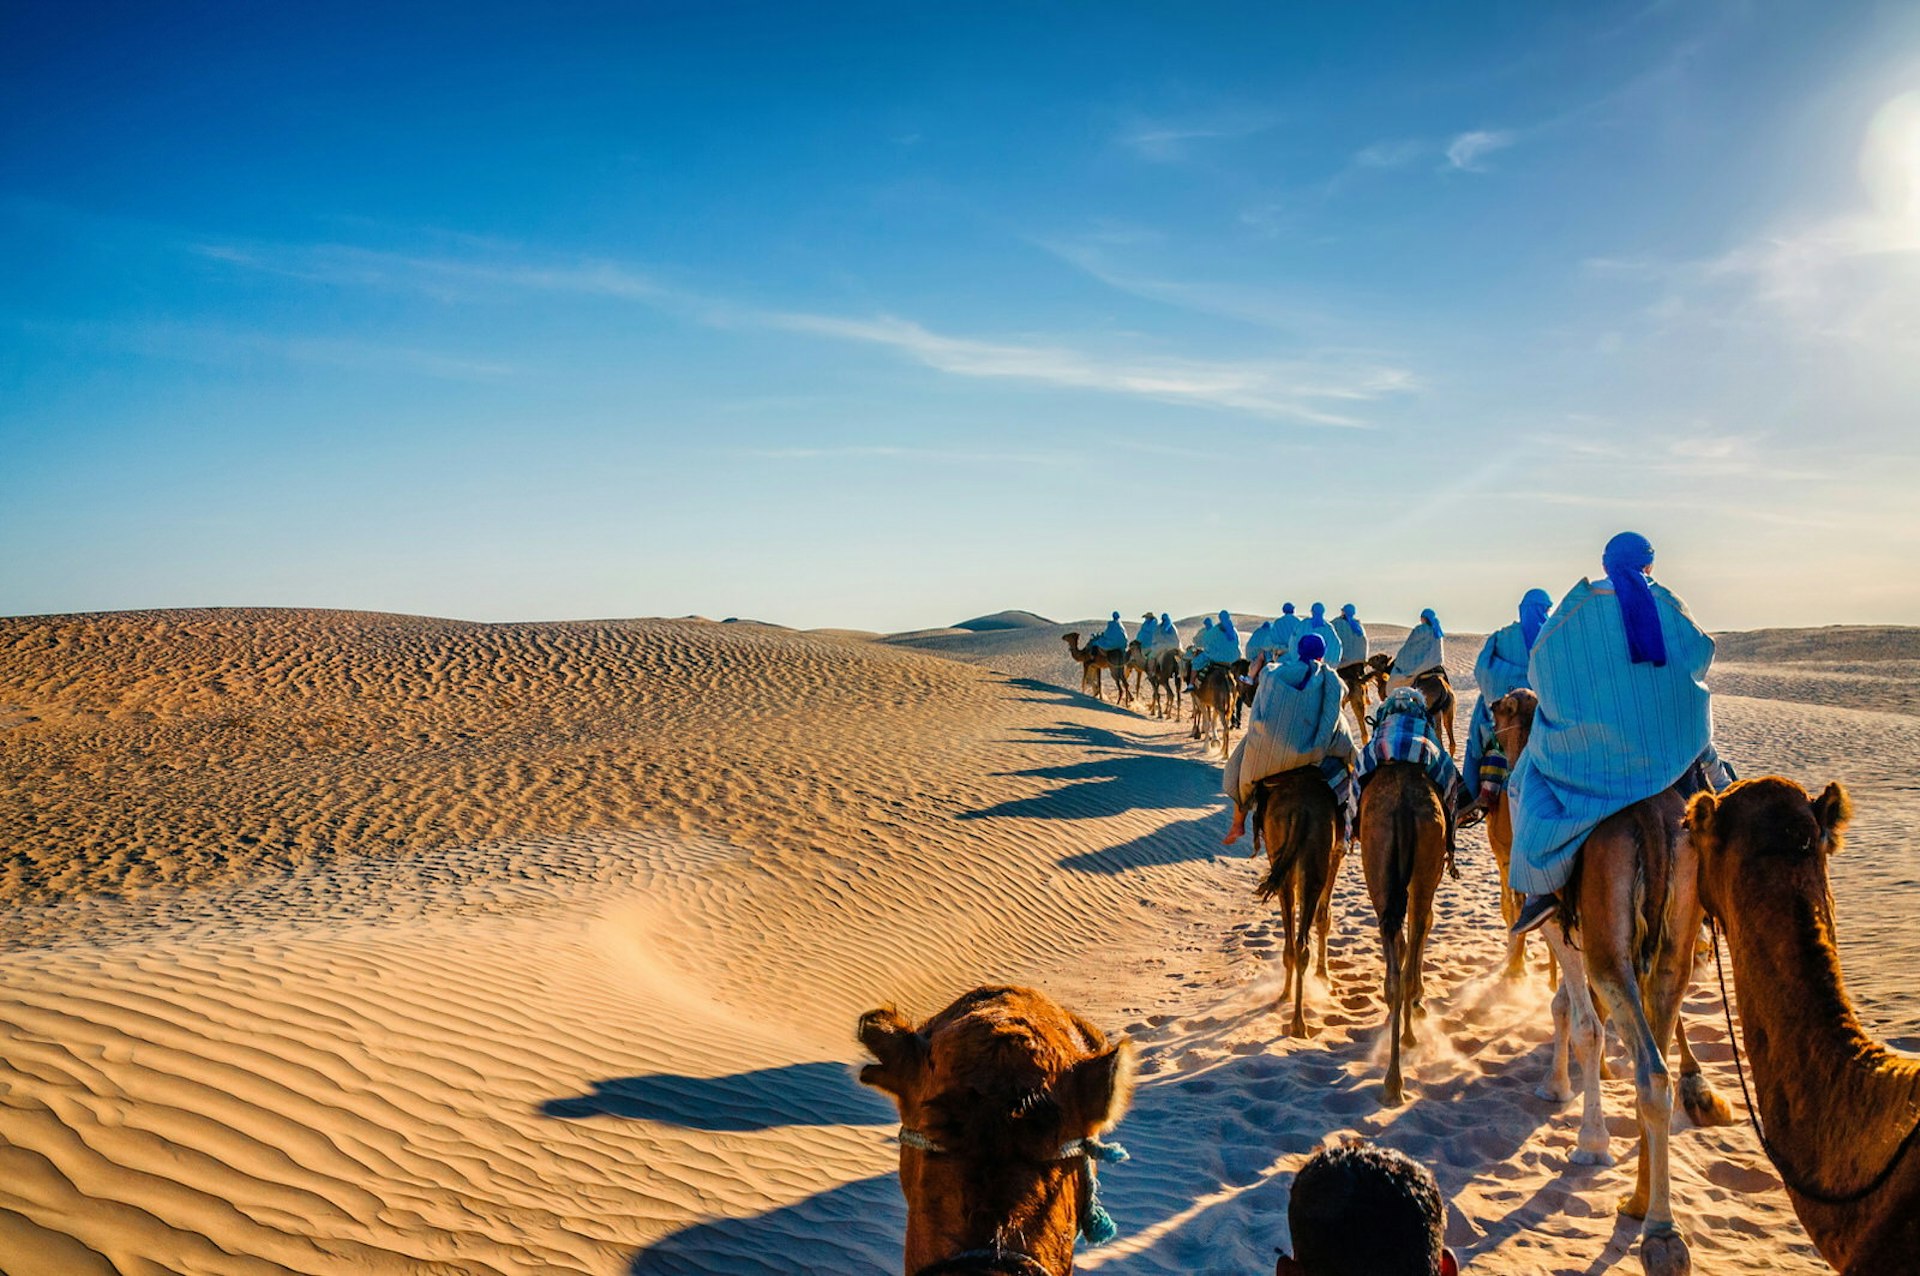 A caravan of camels walking through the sands of the Sahara Desert in Tunisia